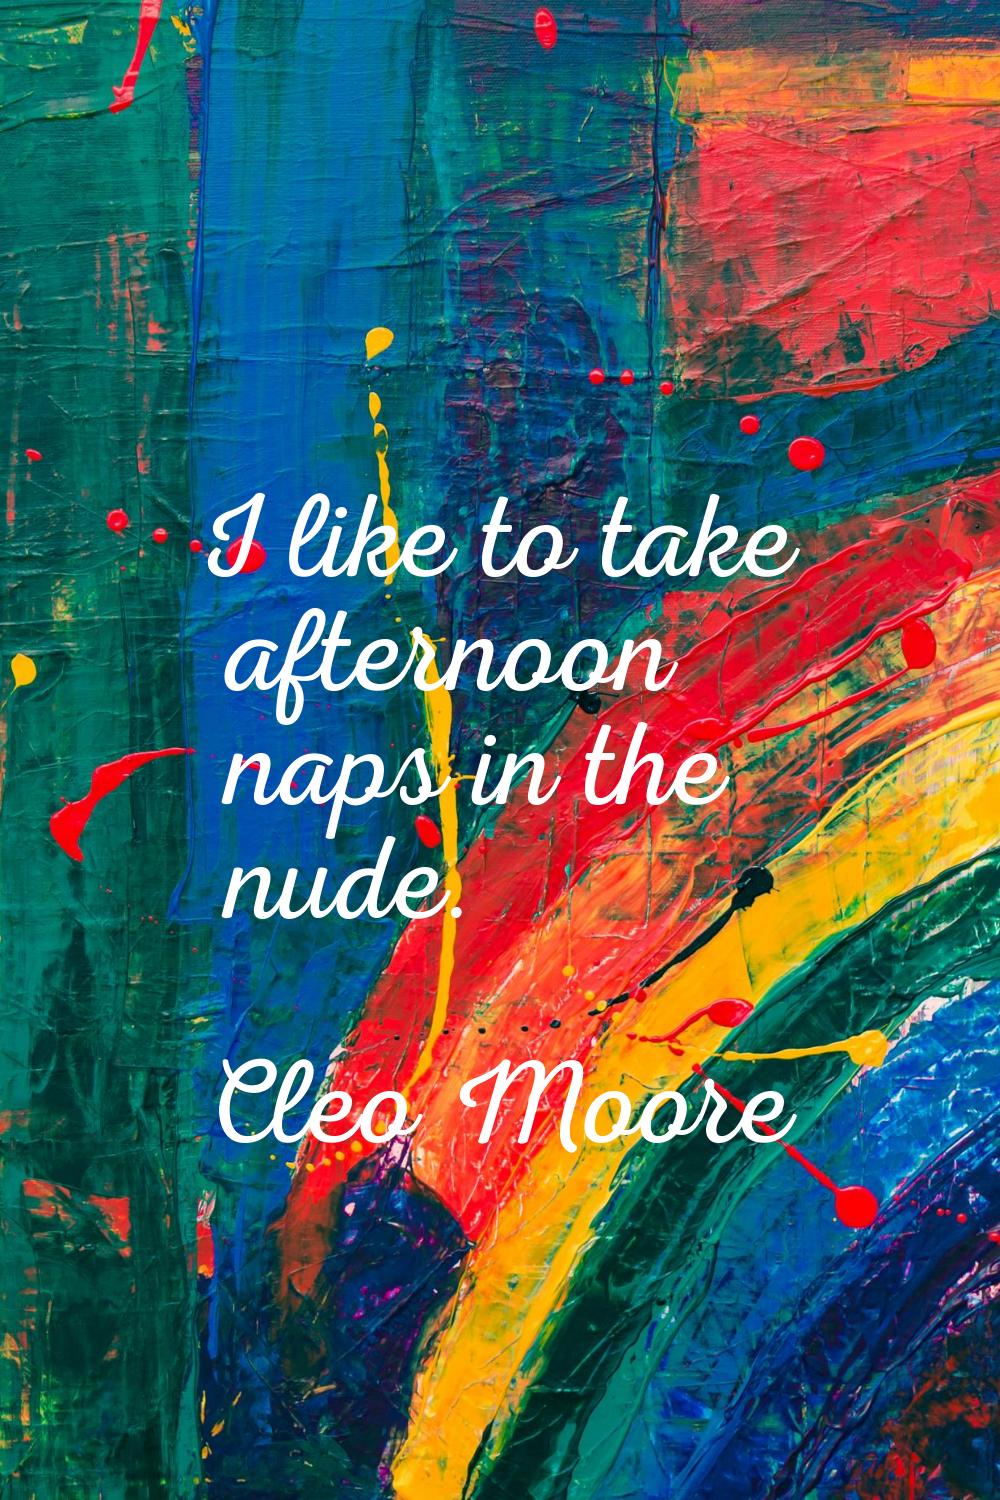 I like to take afternoon naps in the nude.